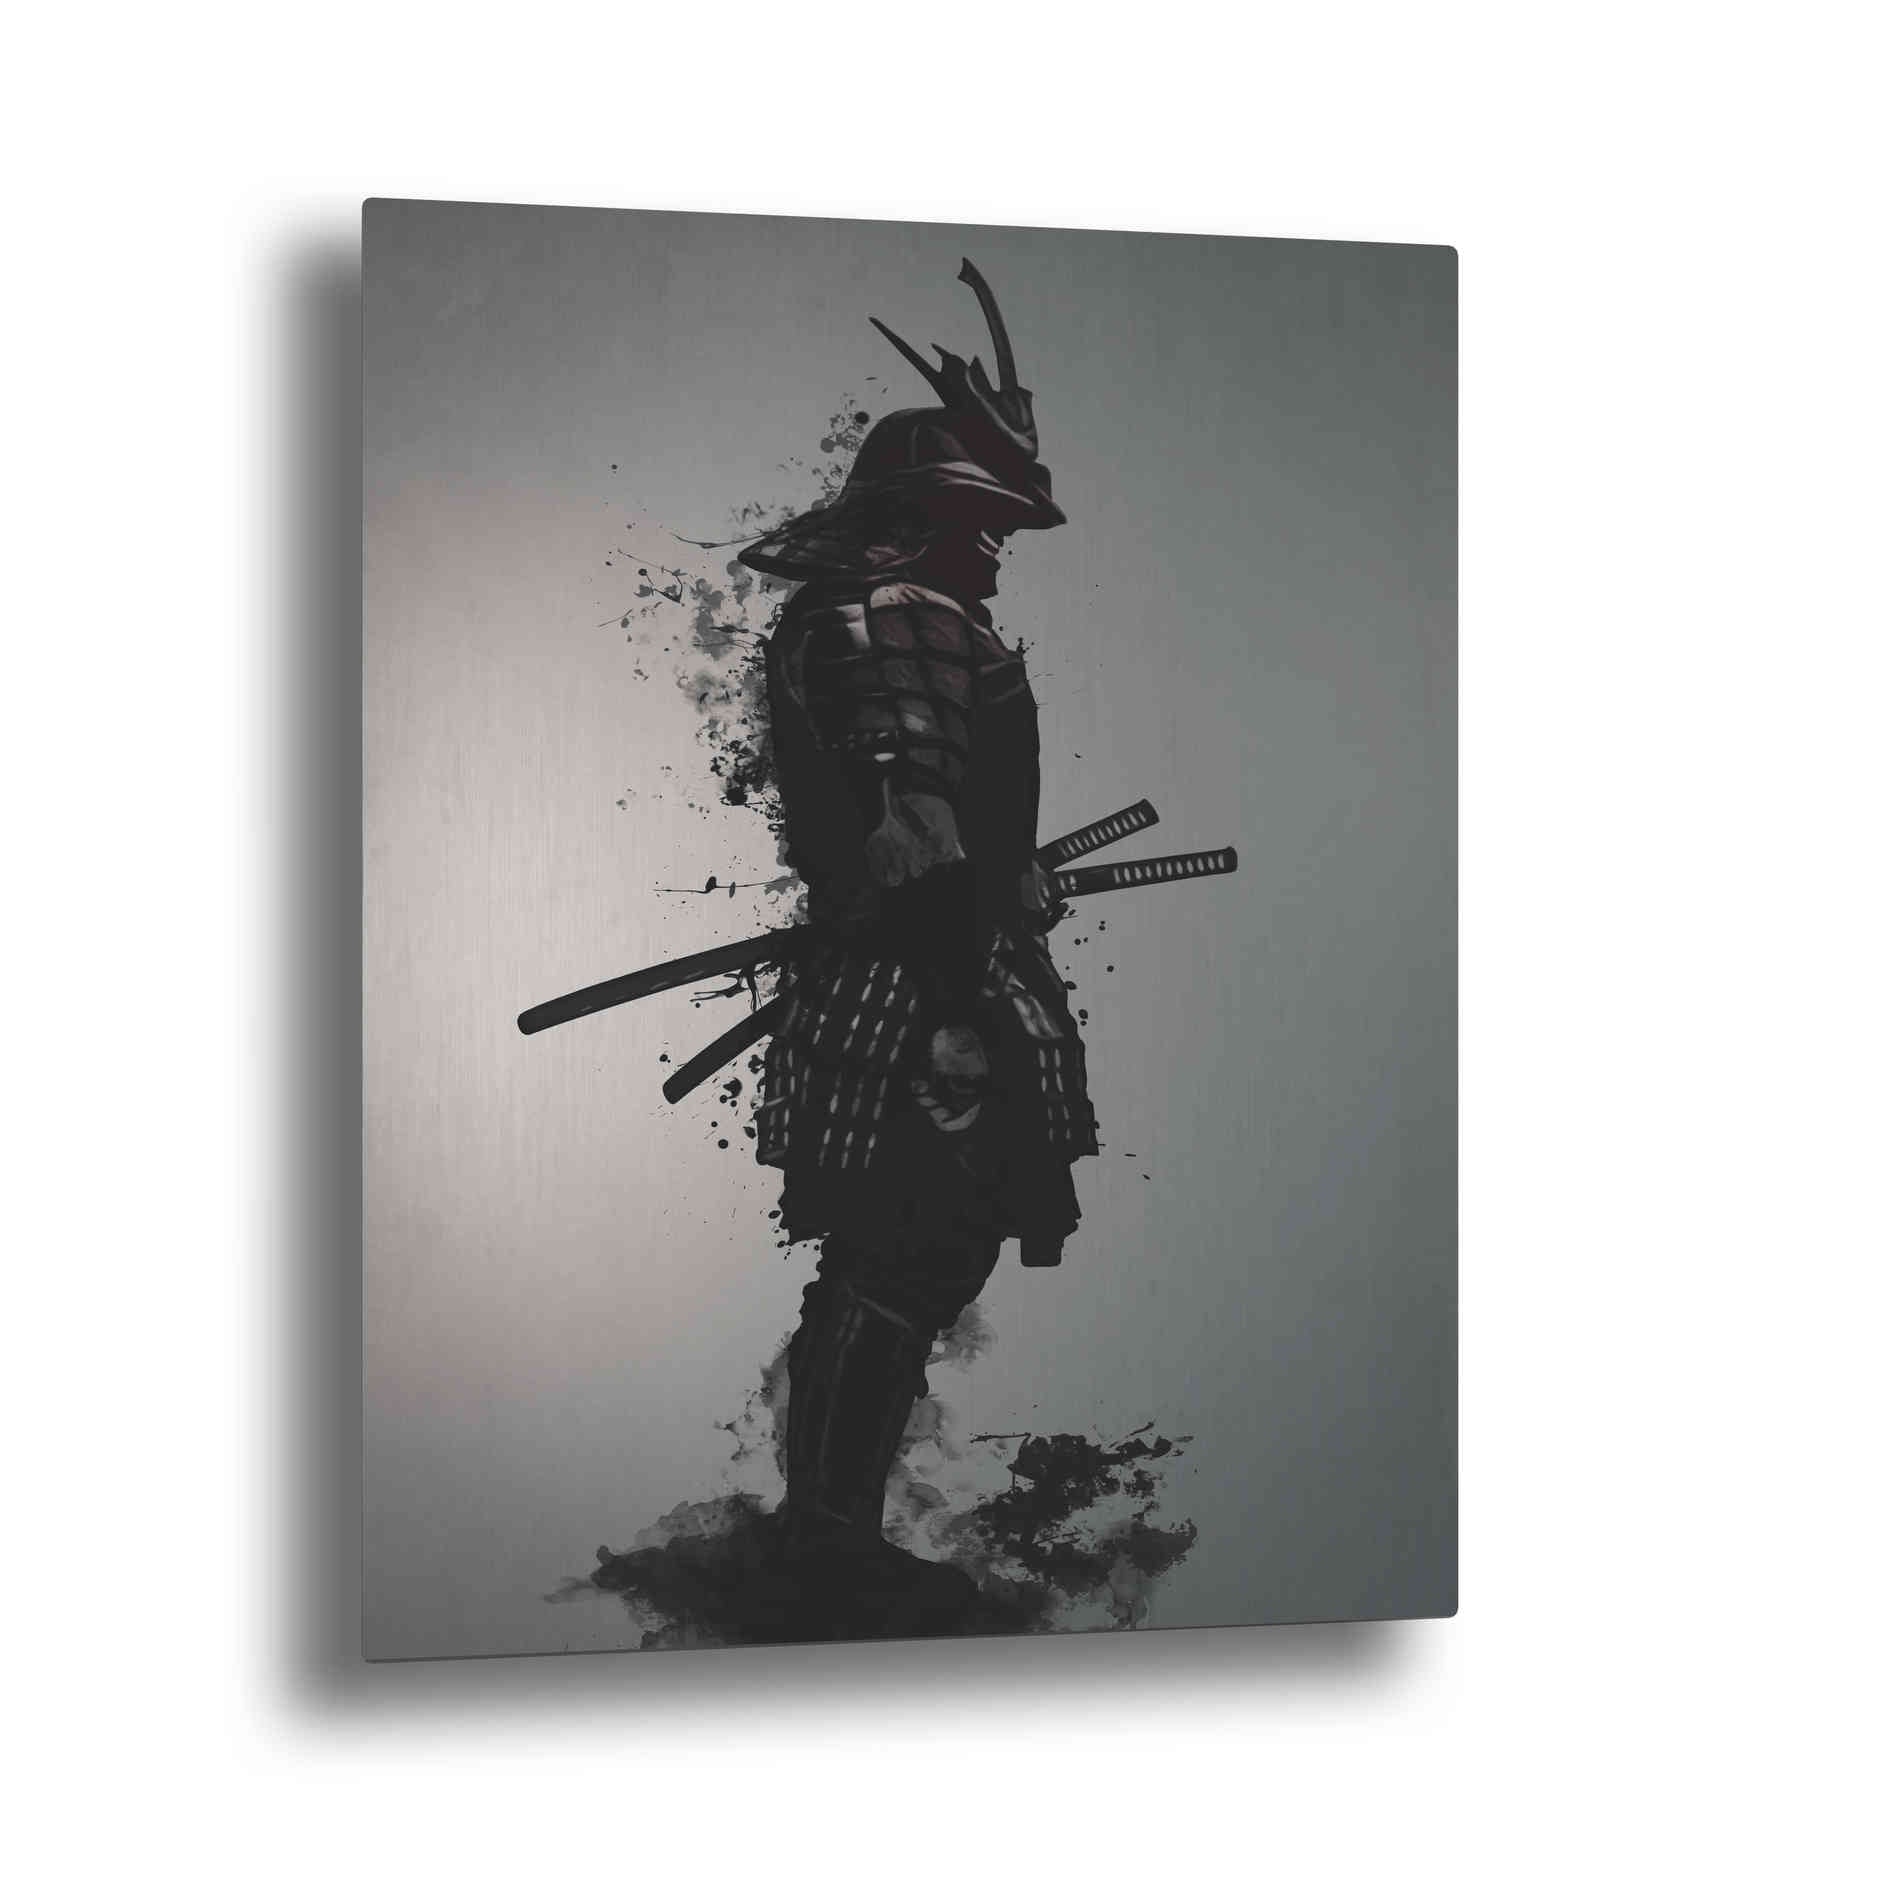 Epic Art "Armored Samurai" by Nicklas Gustafsson, on Brushed Aluminum,30x45